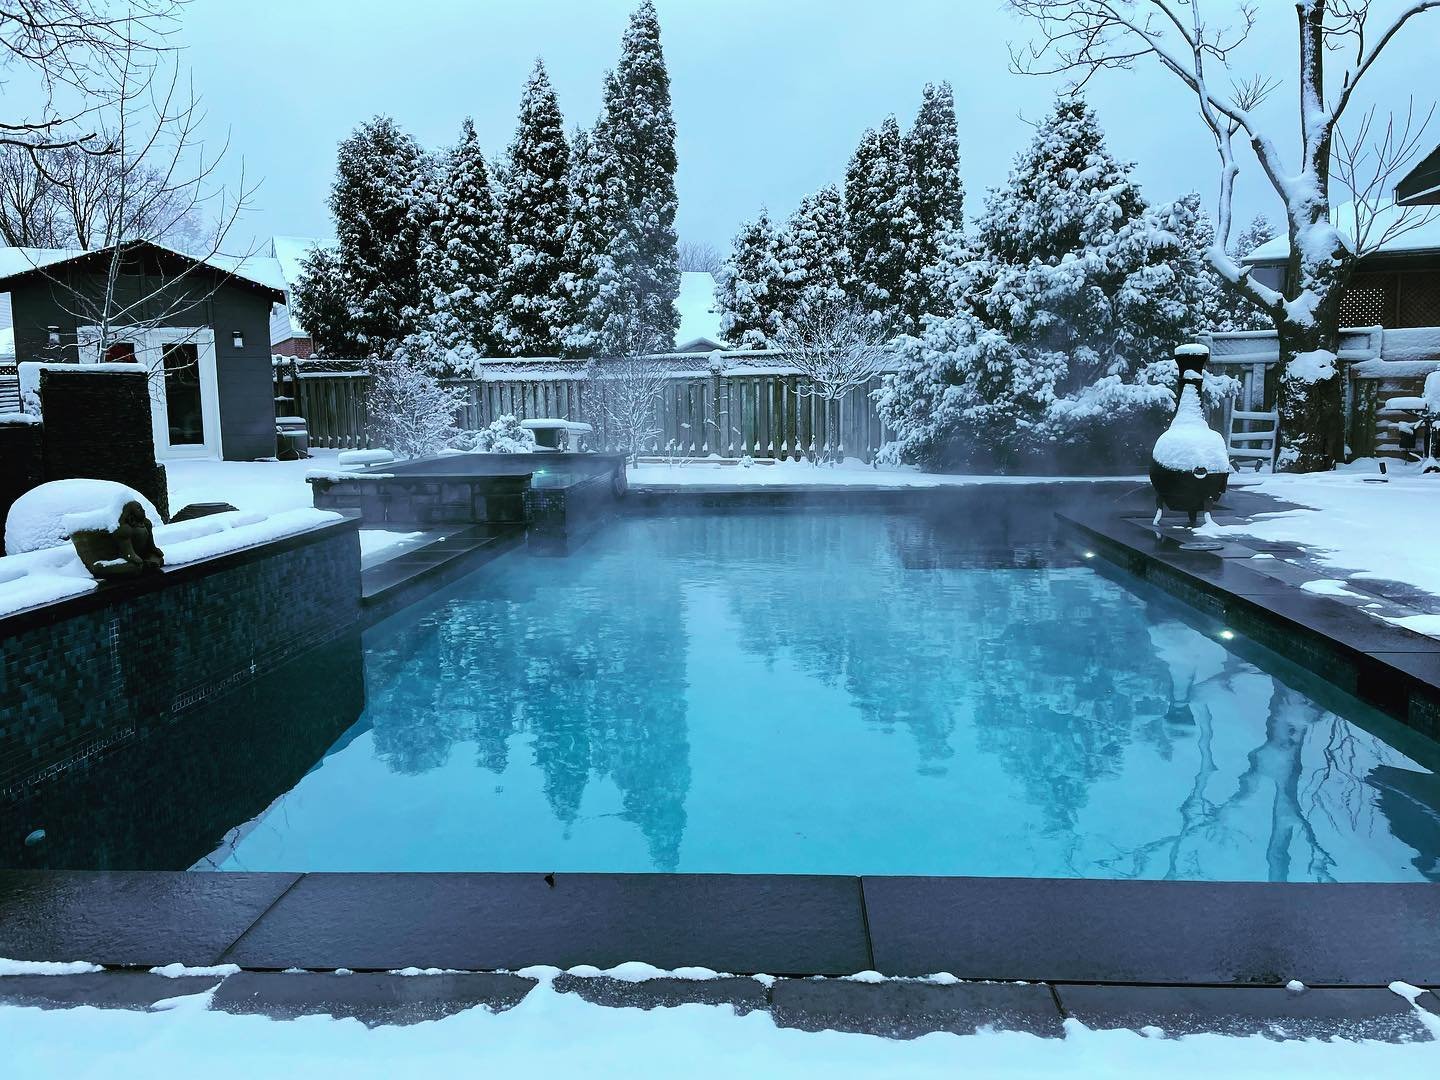 What Is a Concrete Pool?